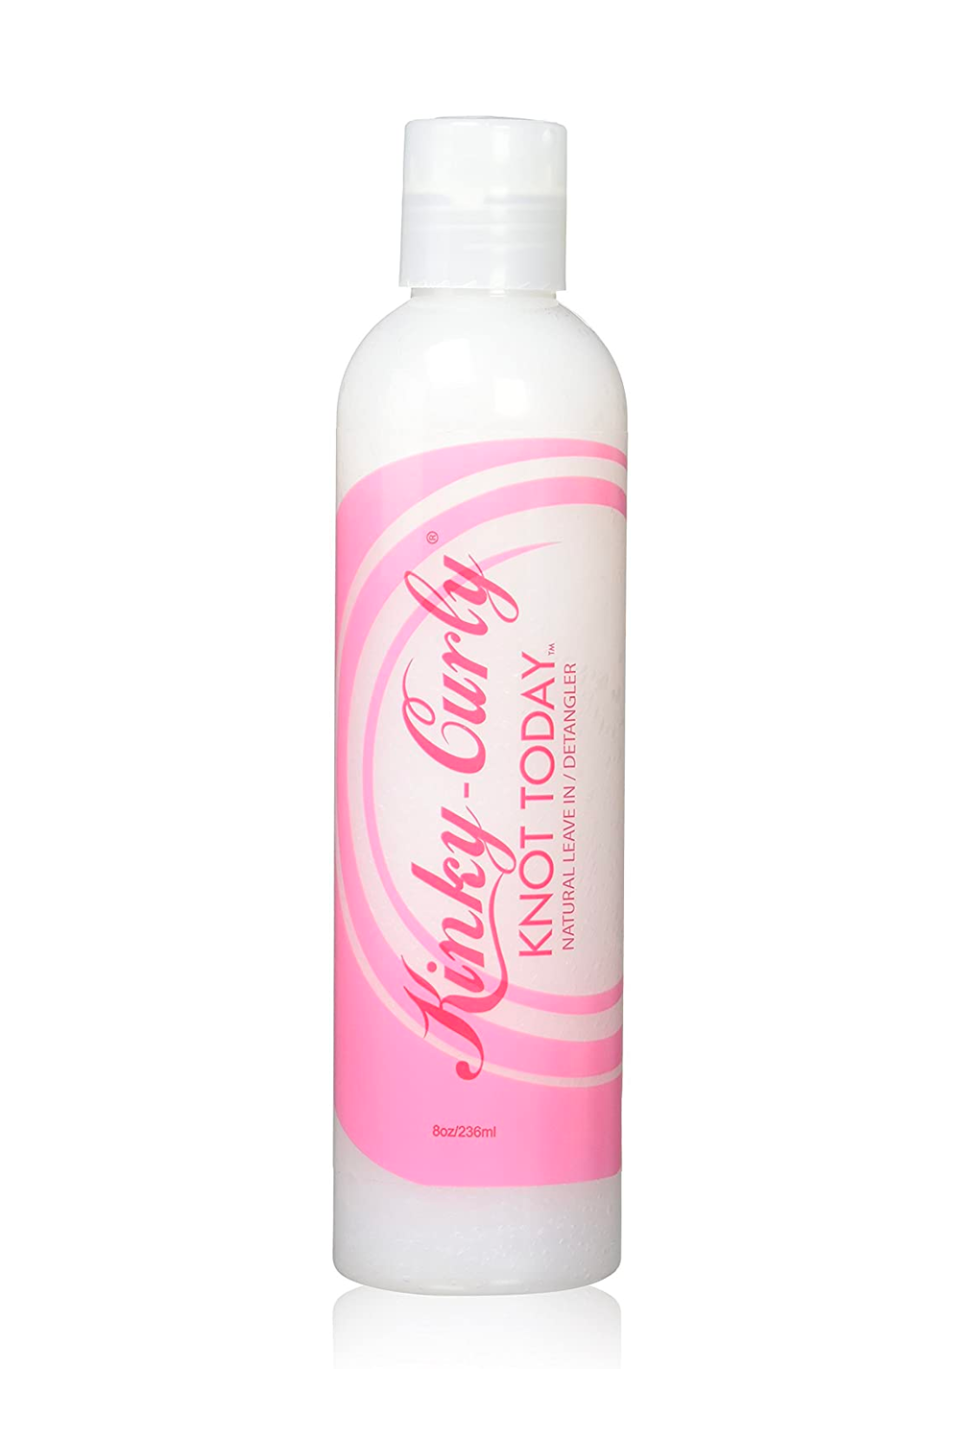 4) Kinky-Curly Knot Today Leave In Conditioner/Detangler